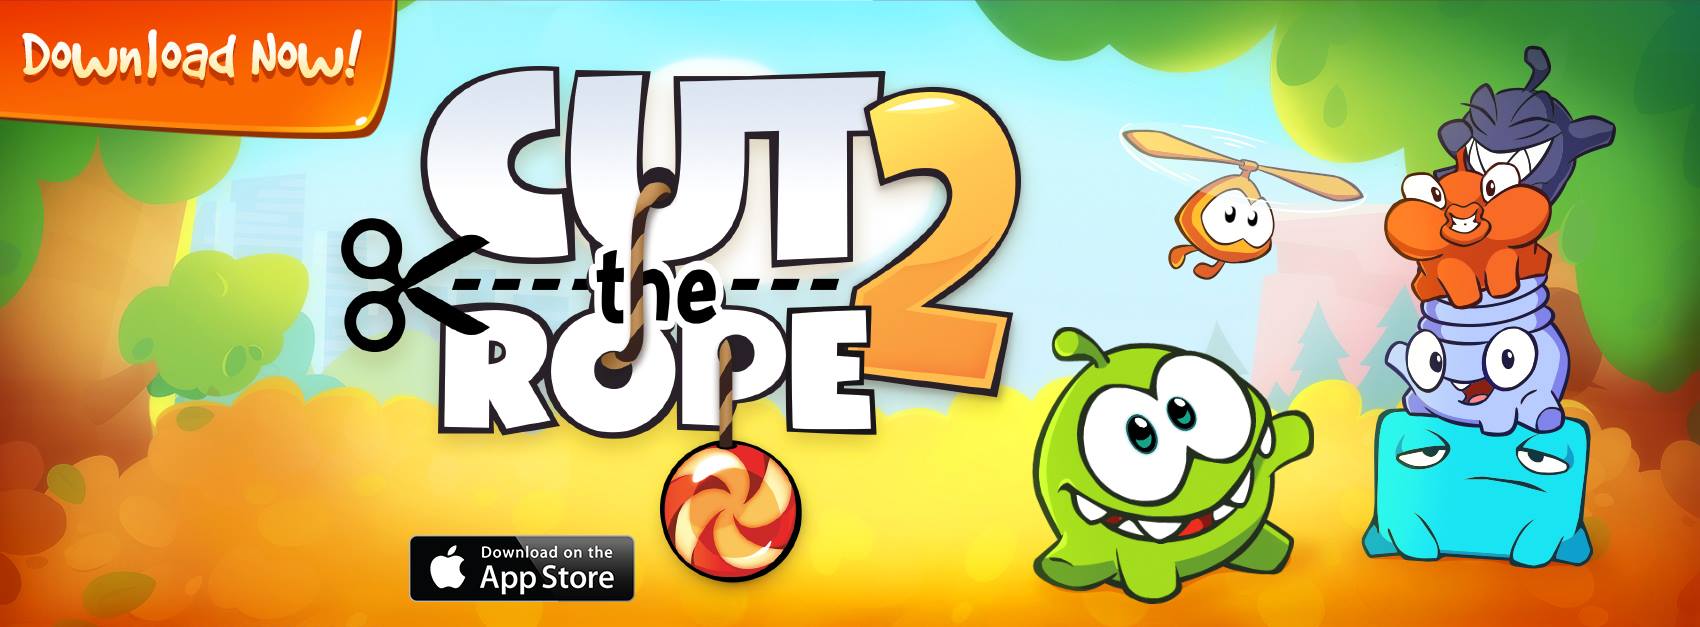 Discuss Everything About The Official Cut the Rope 2